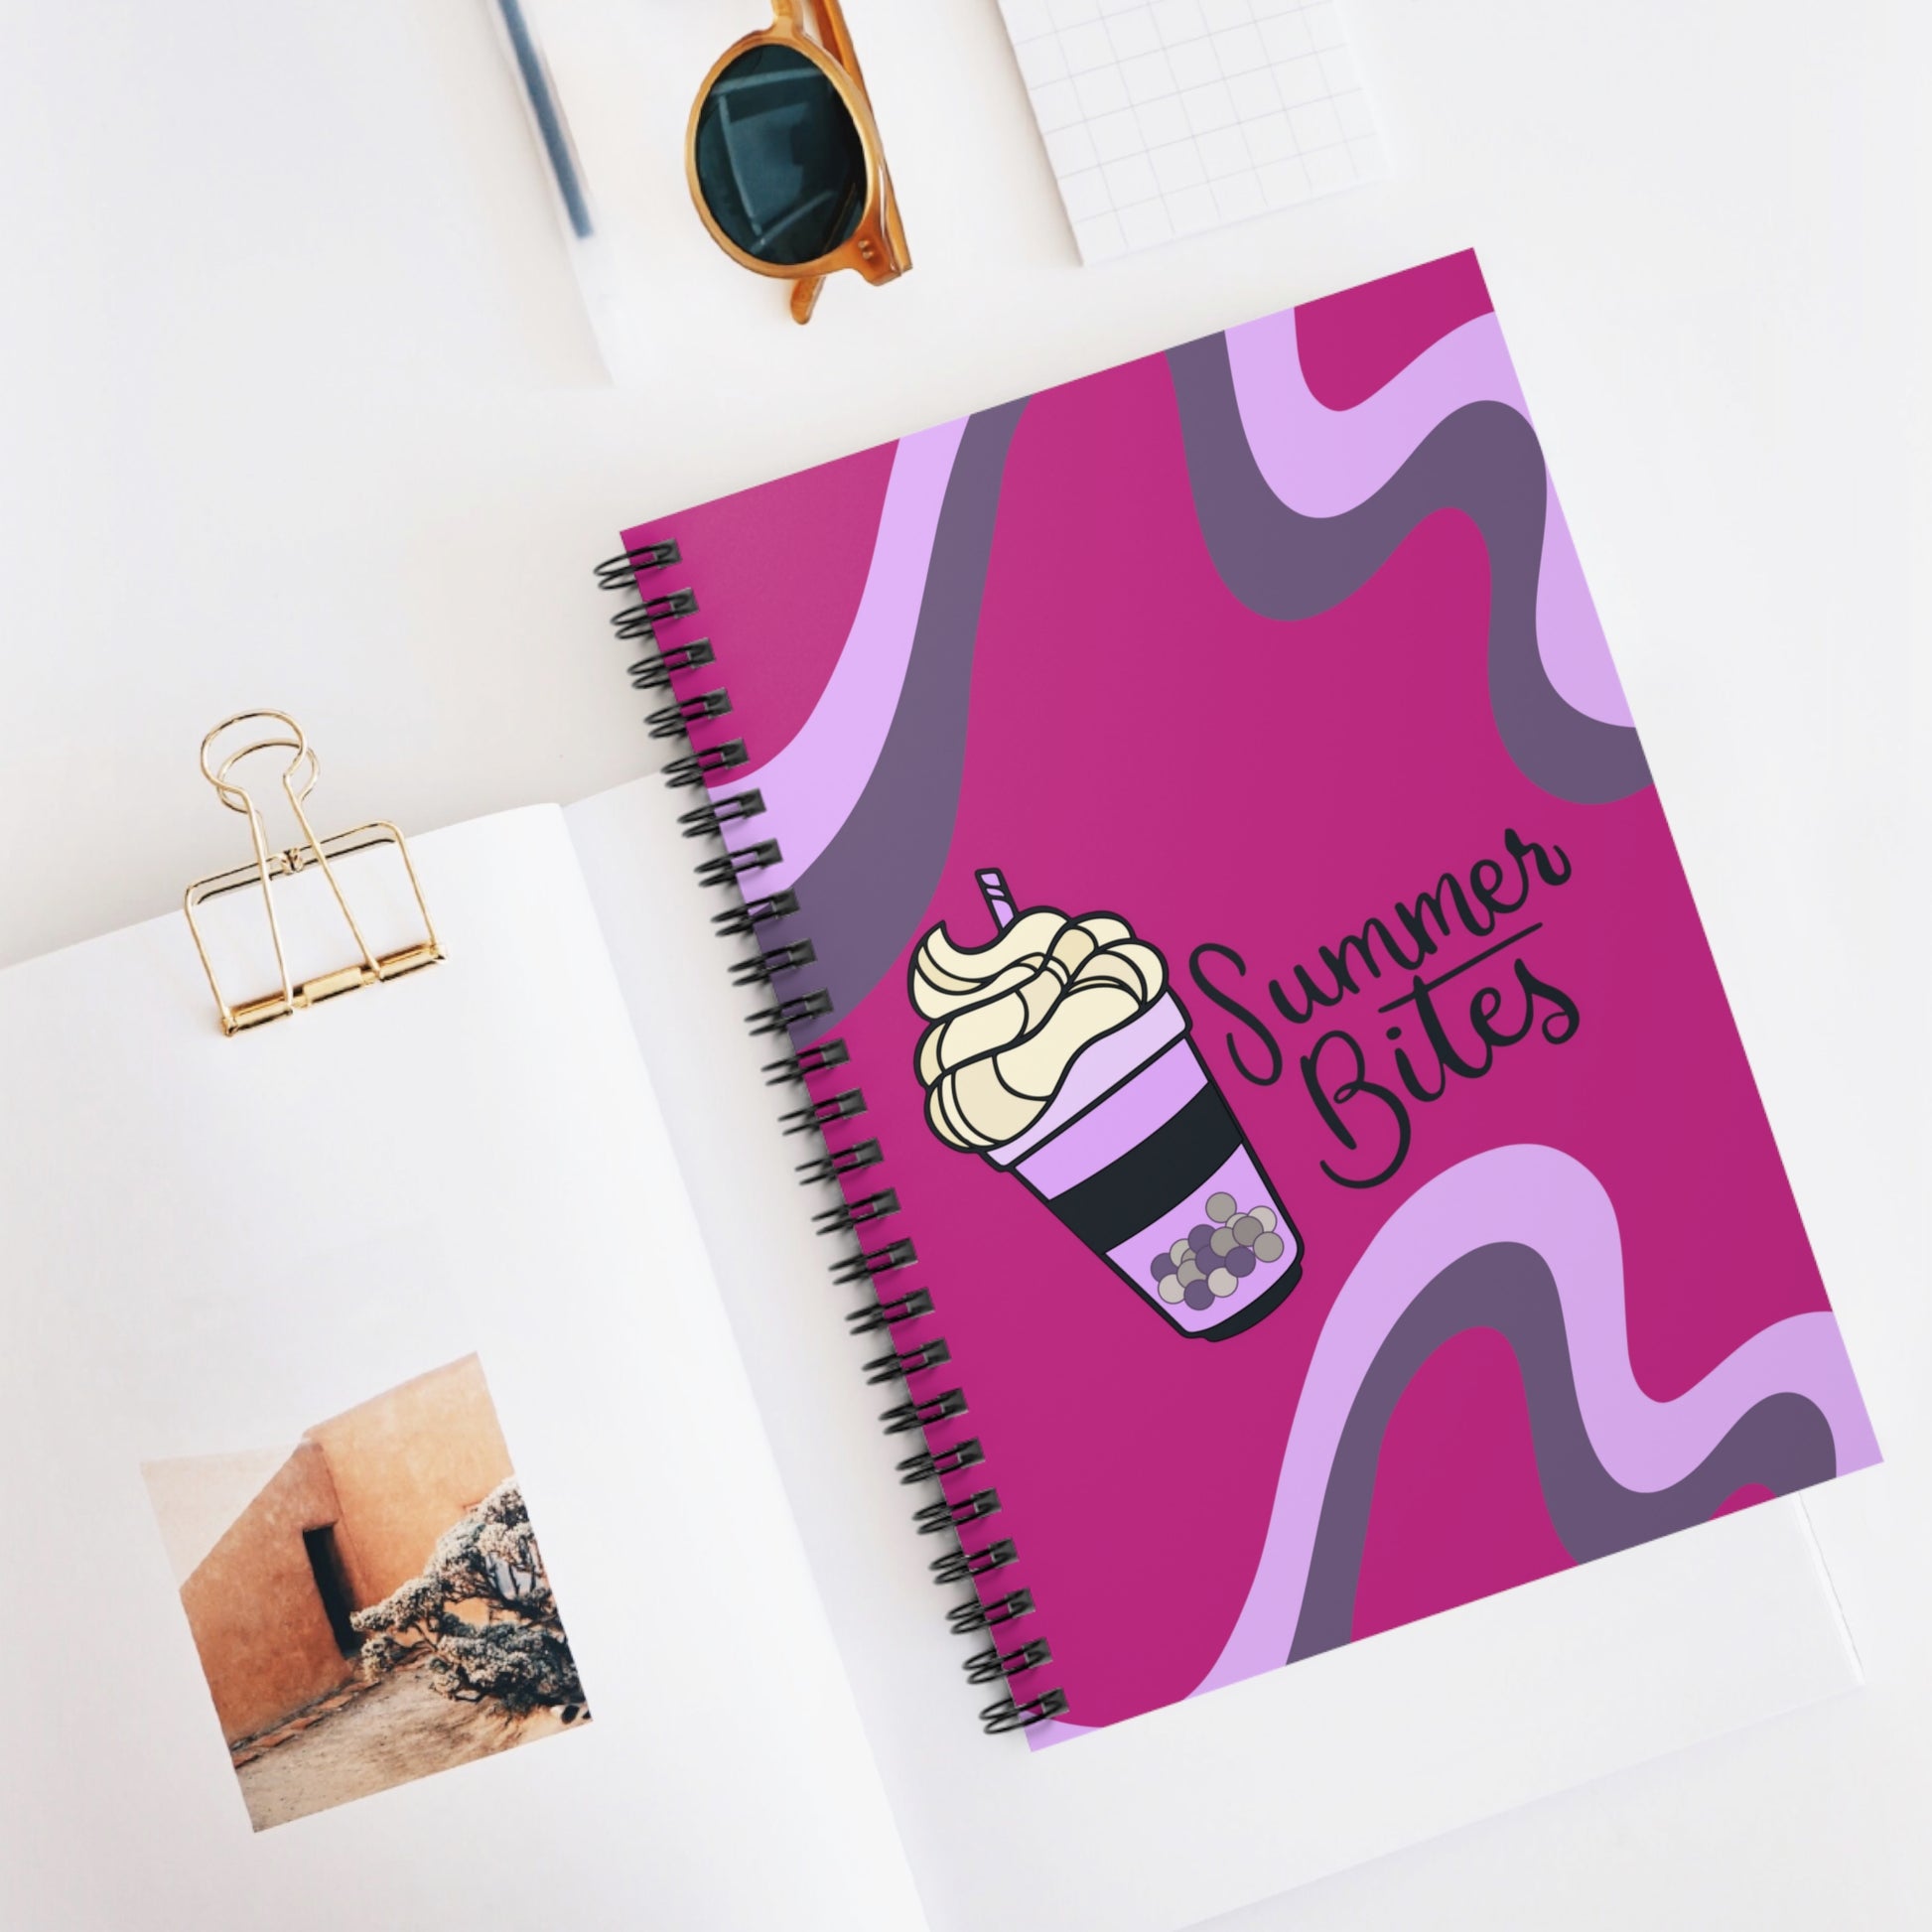 Summer Bites: Spiral Notebook - Log Books - Journals - Diaries - and More Custom Printed by TheGlassyLass.com